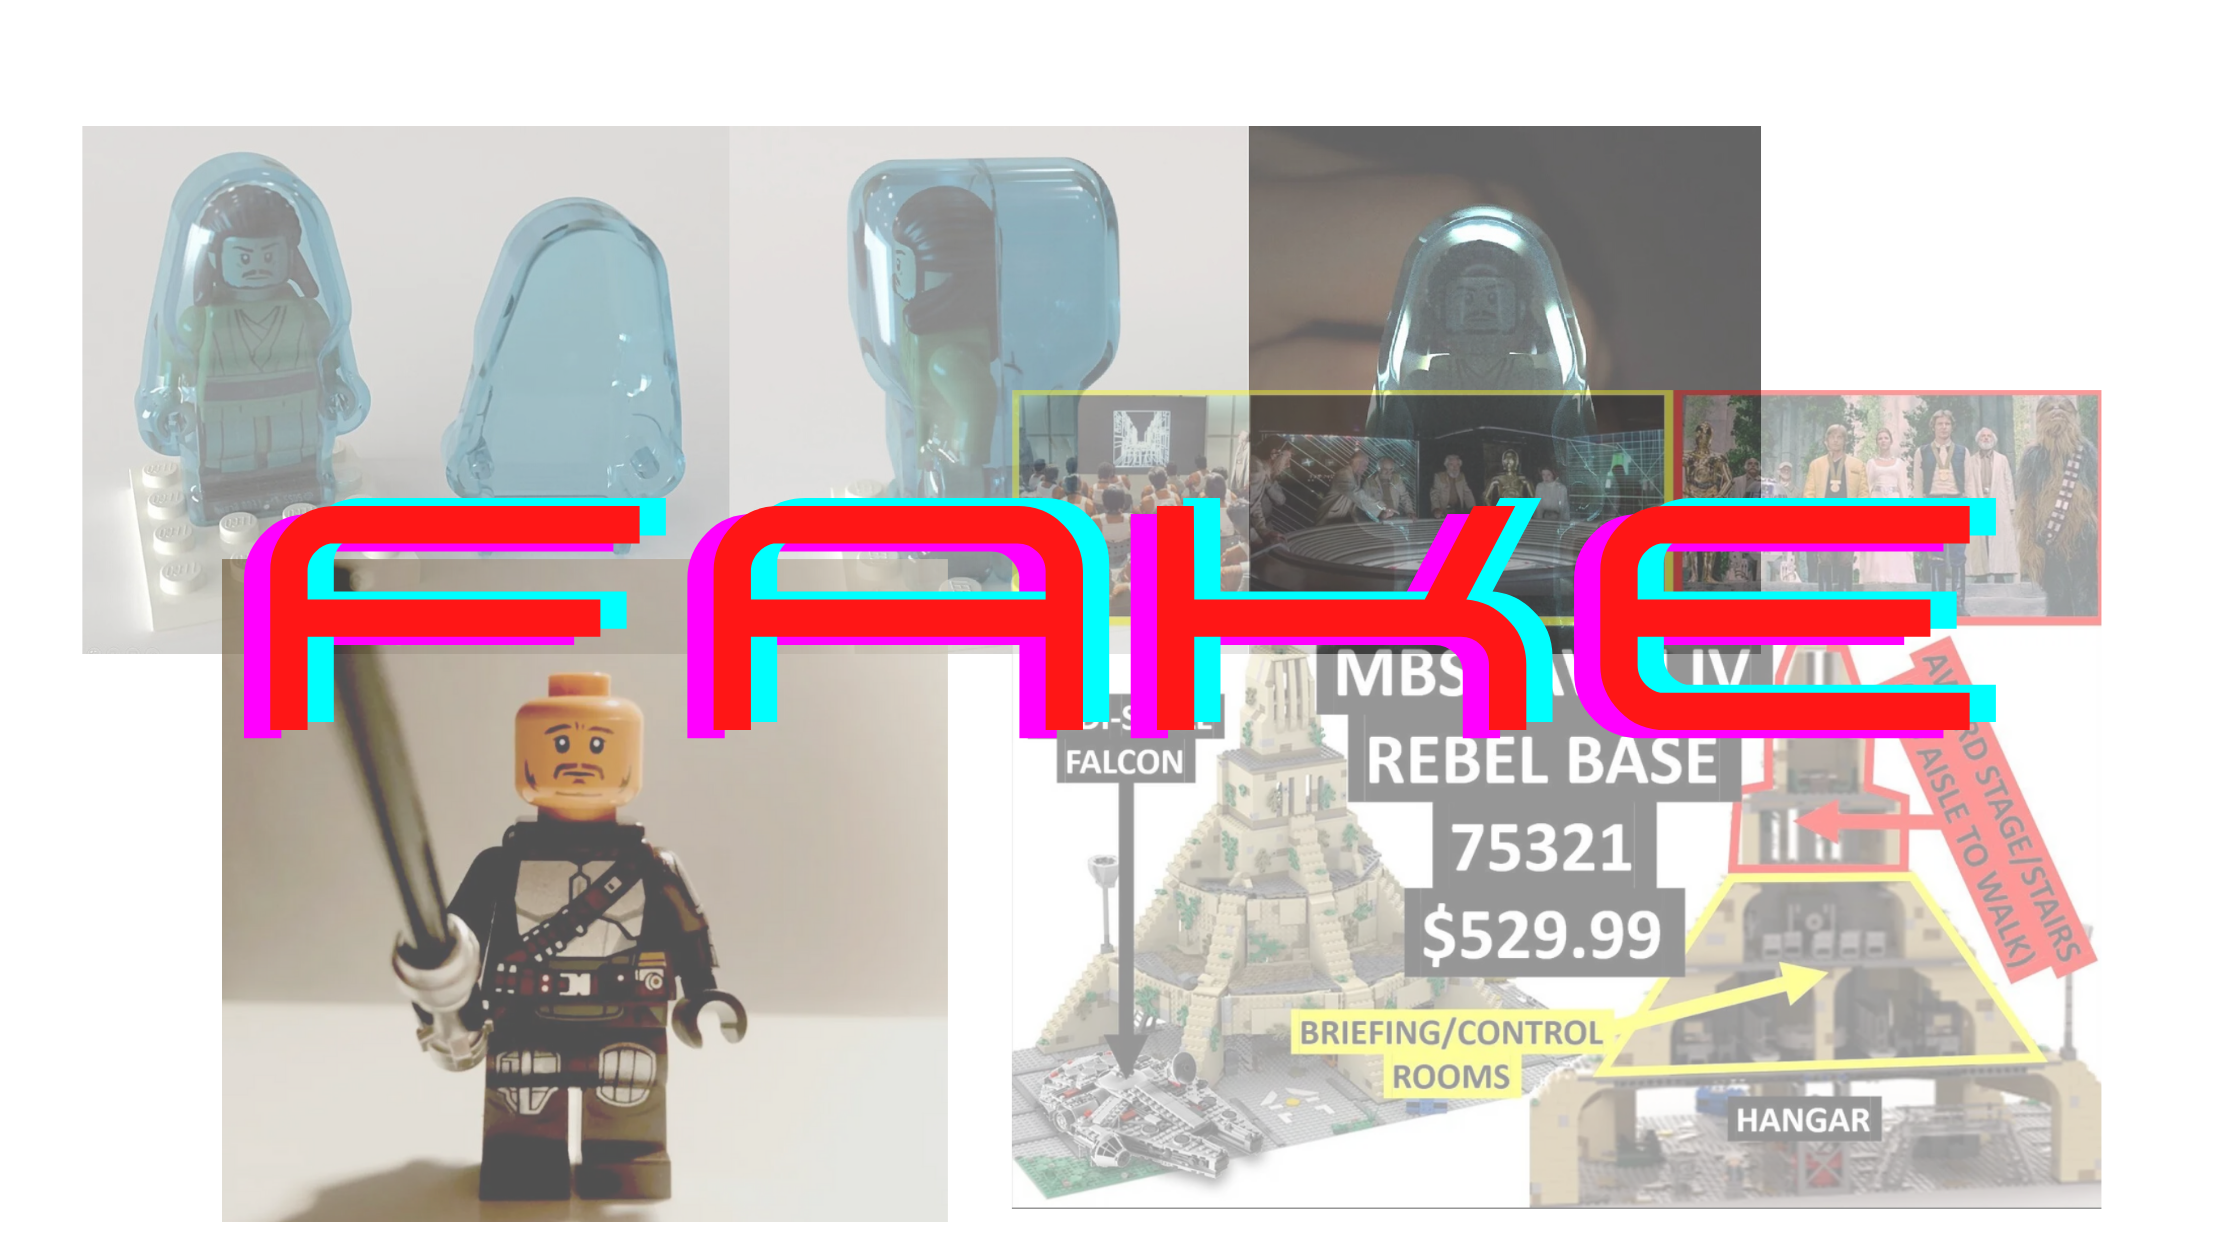 Præstation Tolk Tectonic Recent 2022 LEGO Star Wars leaks and rumours actually an elaborate hoax -  fools Youtubers and LEGO news sites - Jay's Brick Blog